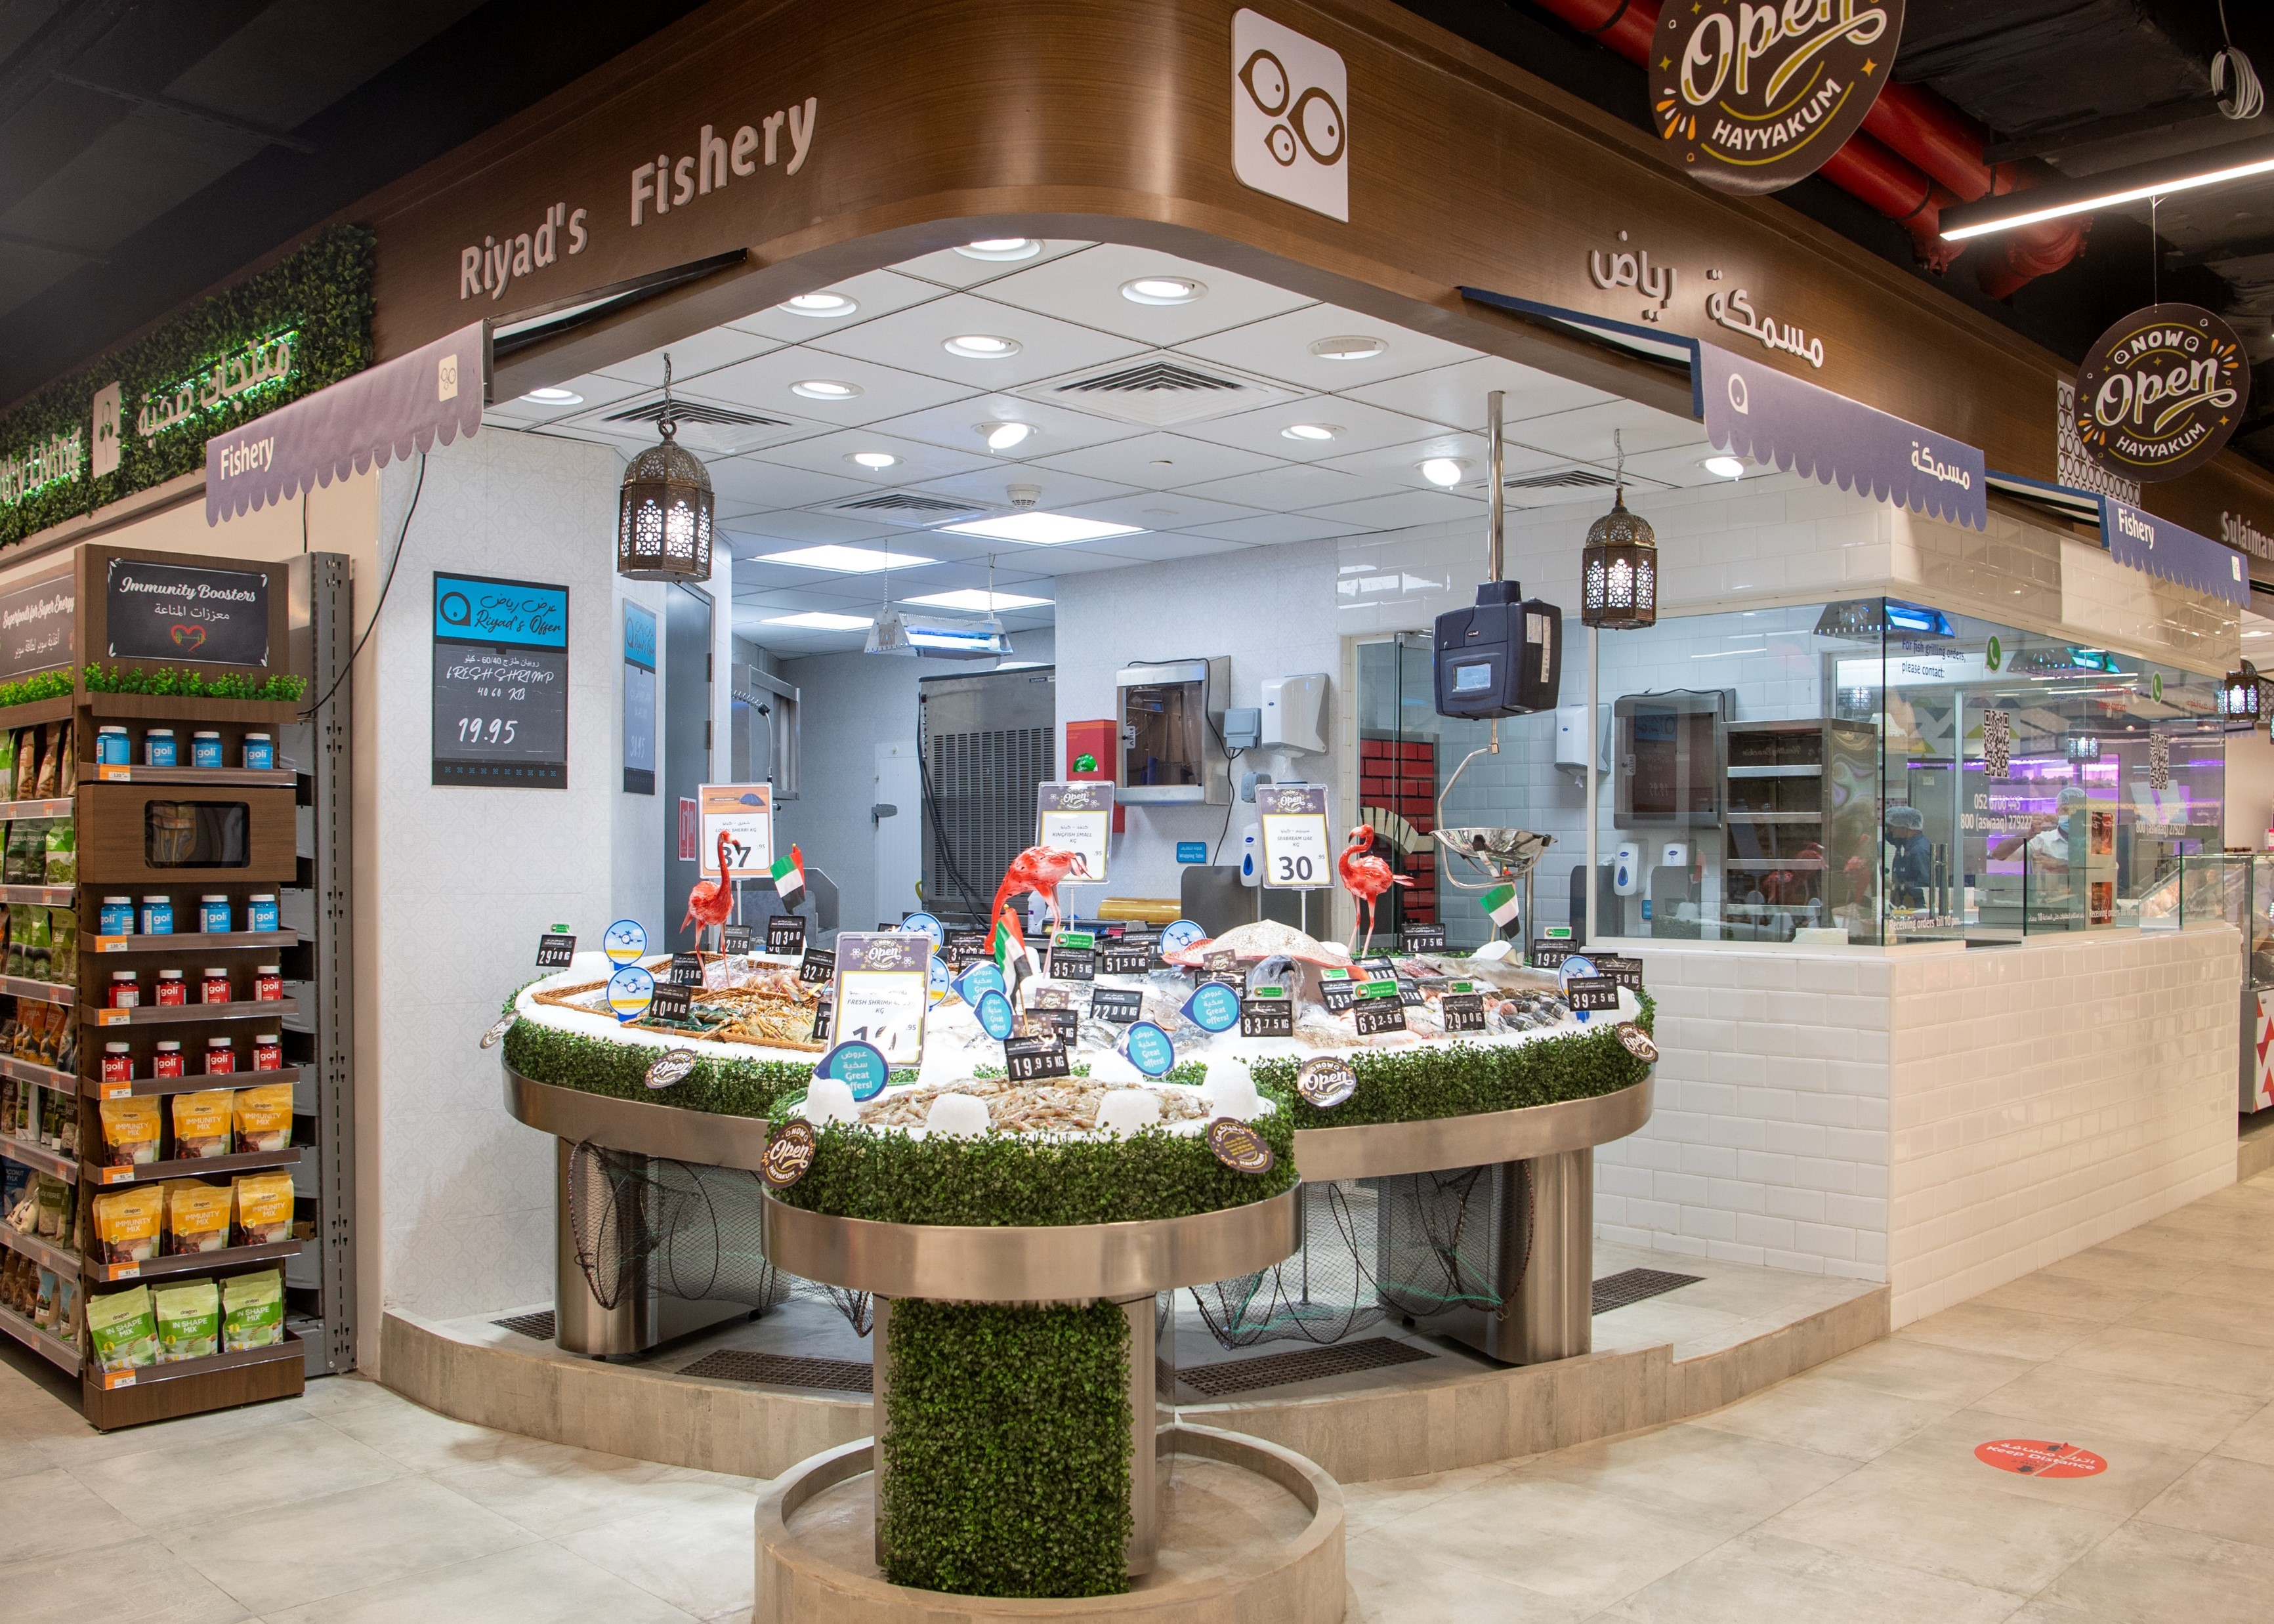 aswaaq Retail L.L.C. revamps existing stores and inaugurates 2 new outlets in Dubai 